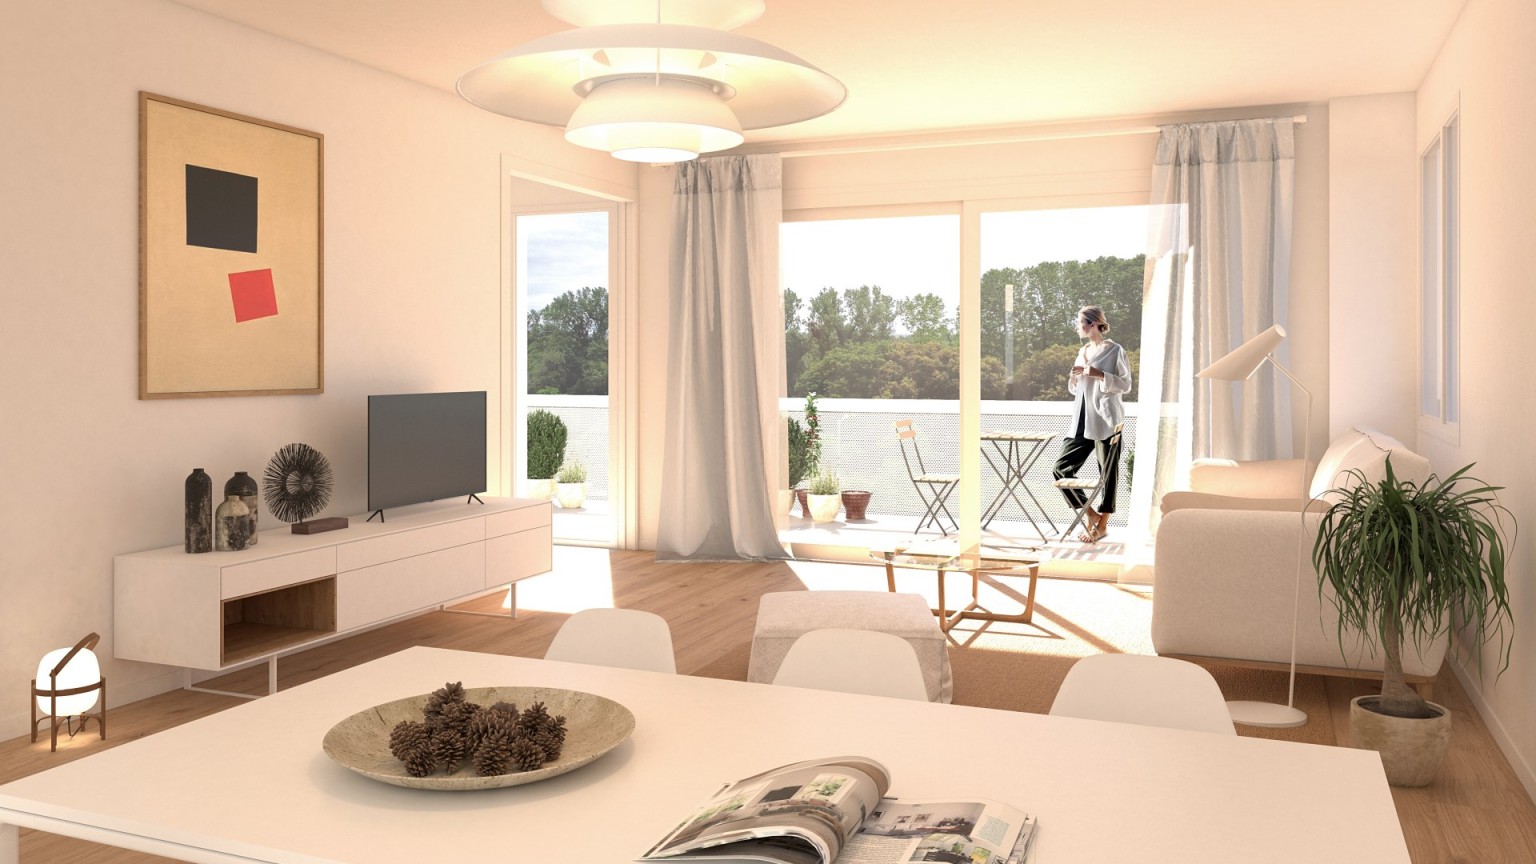 New construction apartment for sale, in the Domeny area of ​​Girona.